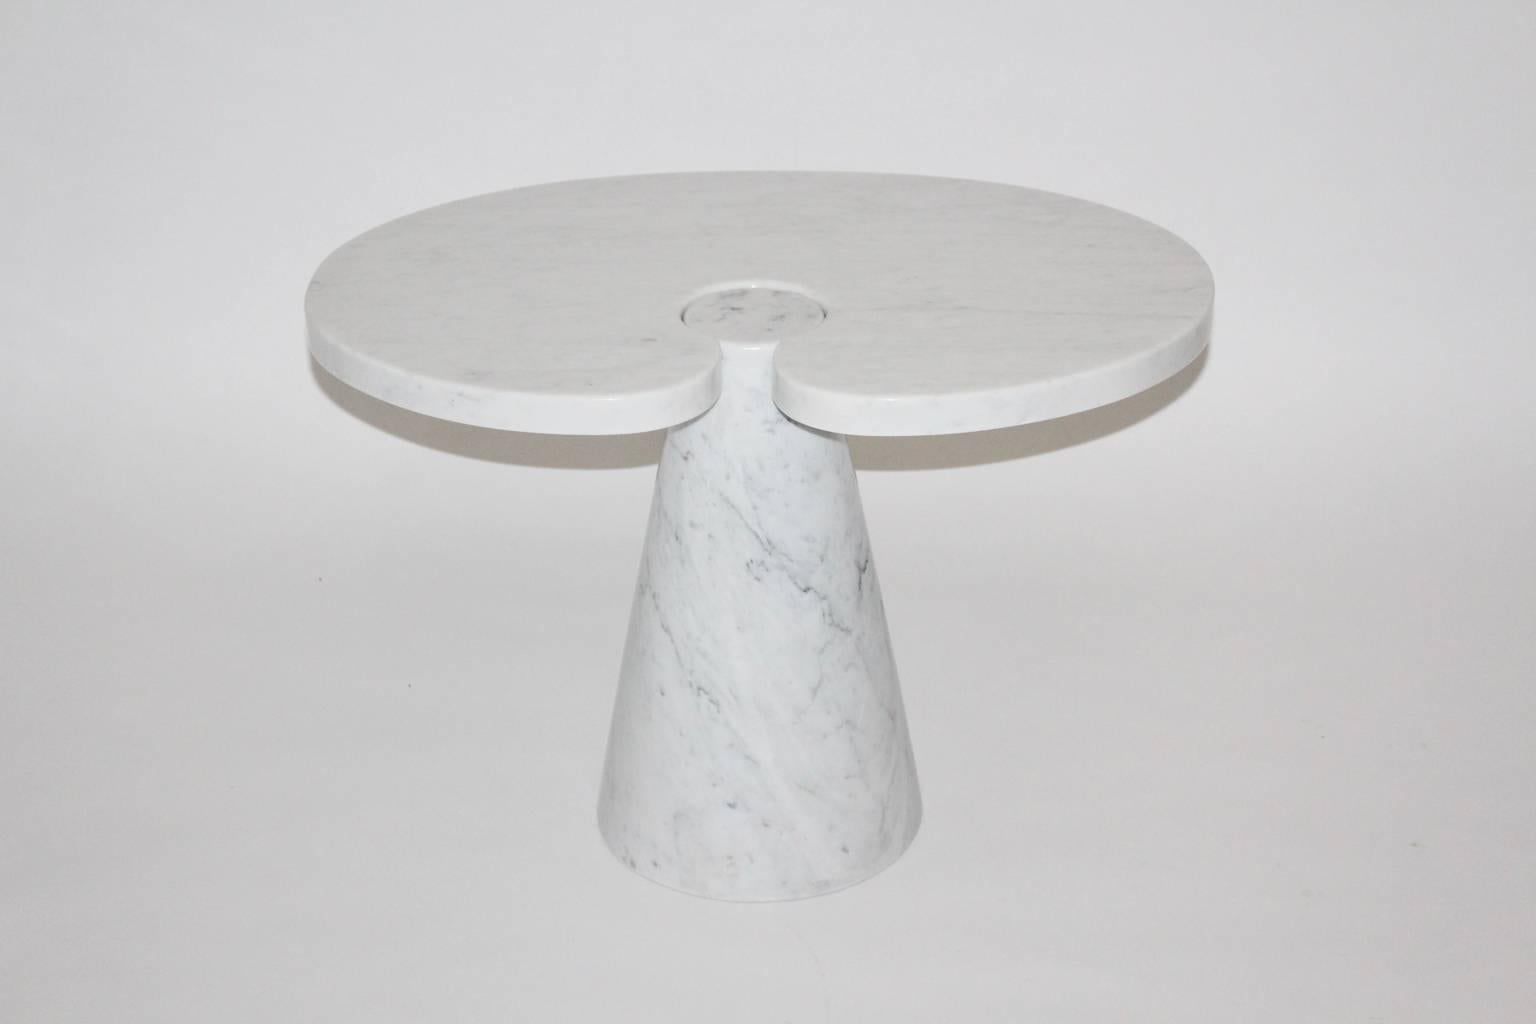 Carrara marble side table from the series Eros; designed by Angelo Mangiarotti 1970s and executed by Skipper, Italy.
The side table is labeled underneath the top with a paper label.

Very good condition.
All measures are approximate